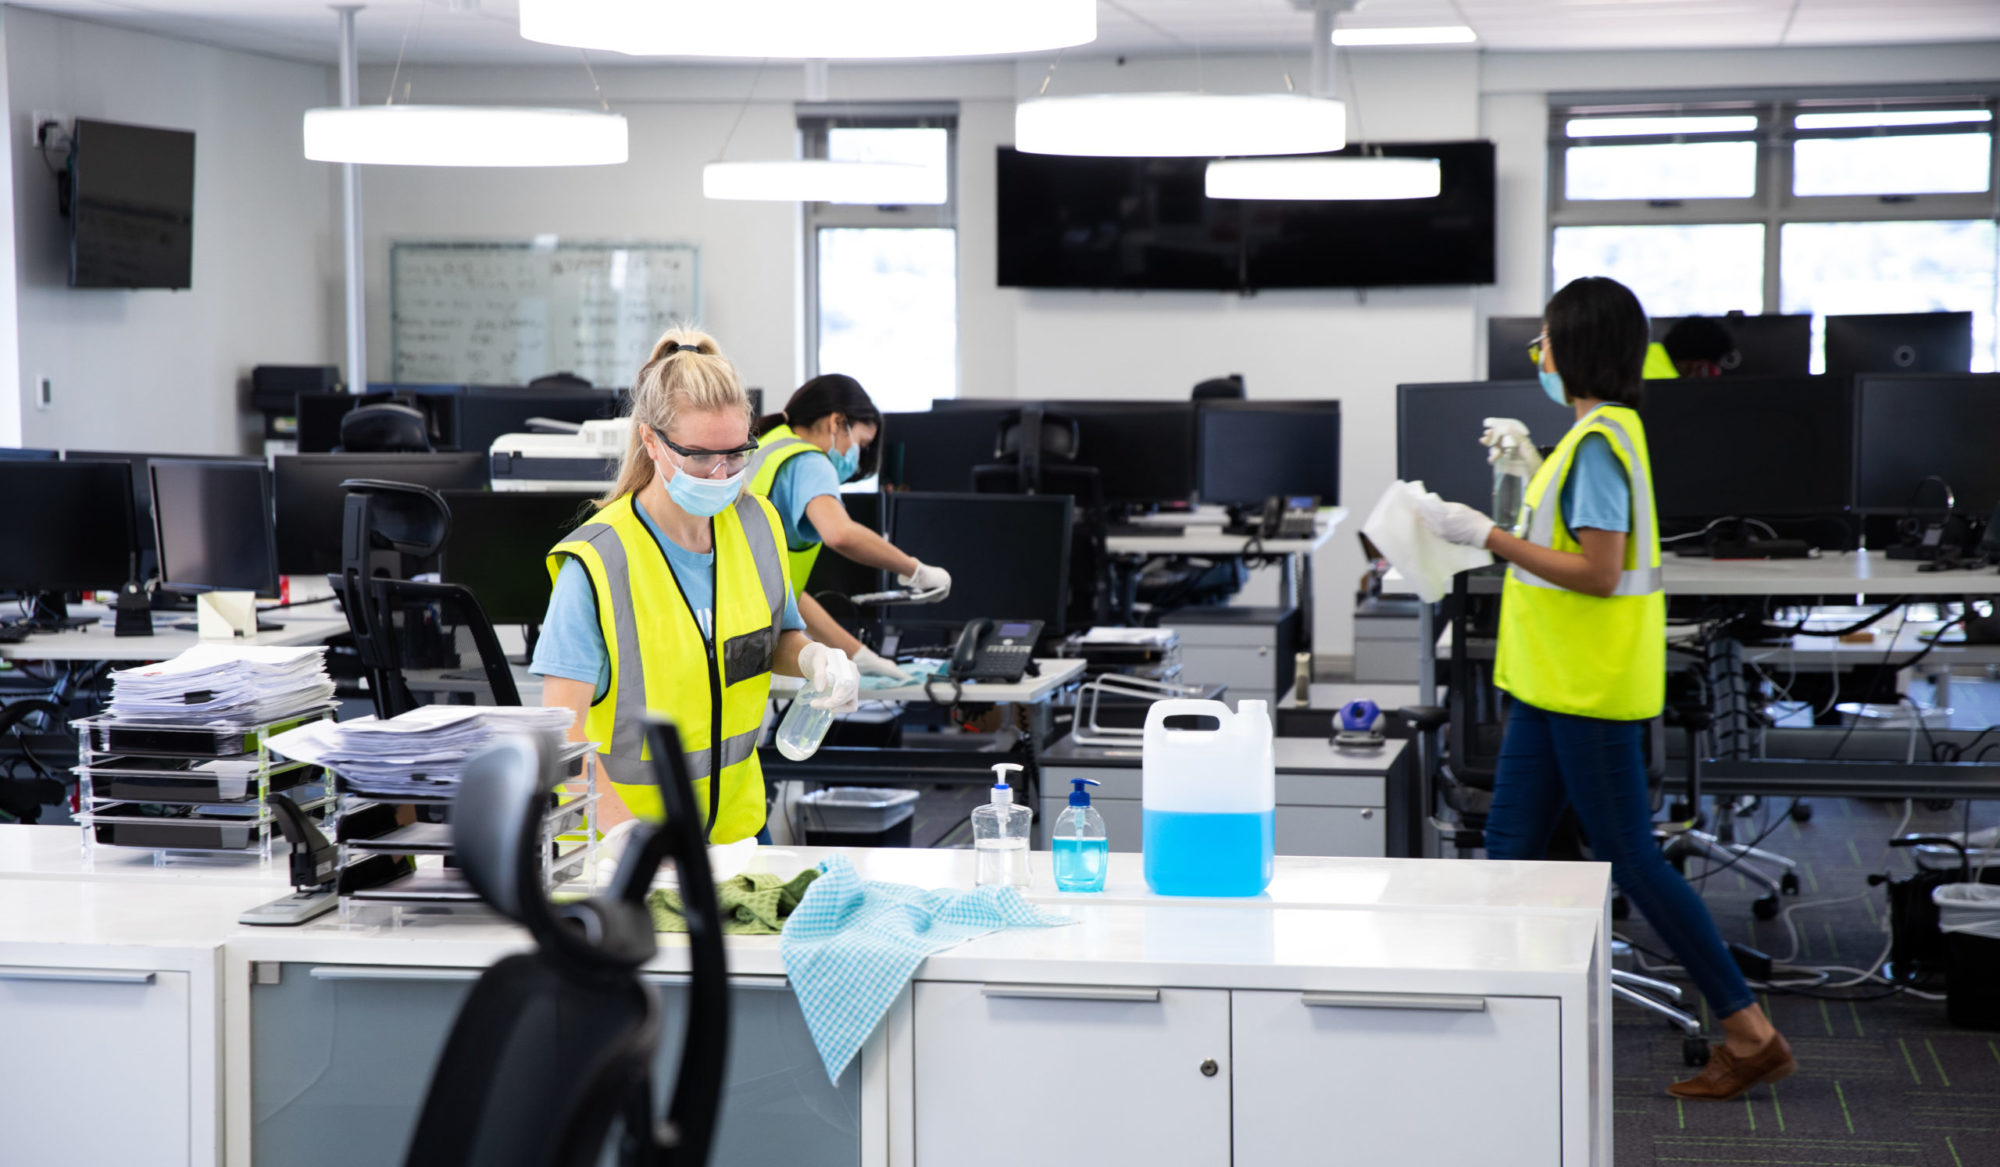 Caucasian woman cleaning an office wearing hi vis vest, gloves and face mask, using disinfectant, colleagues working in background. Hygiene in workplace during Coronavirus Covid 19 pandemic.